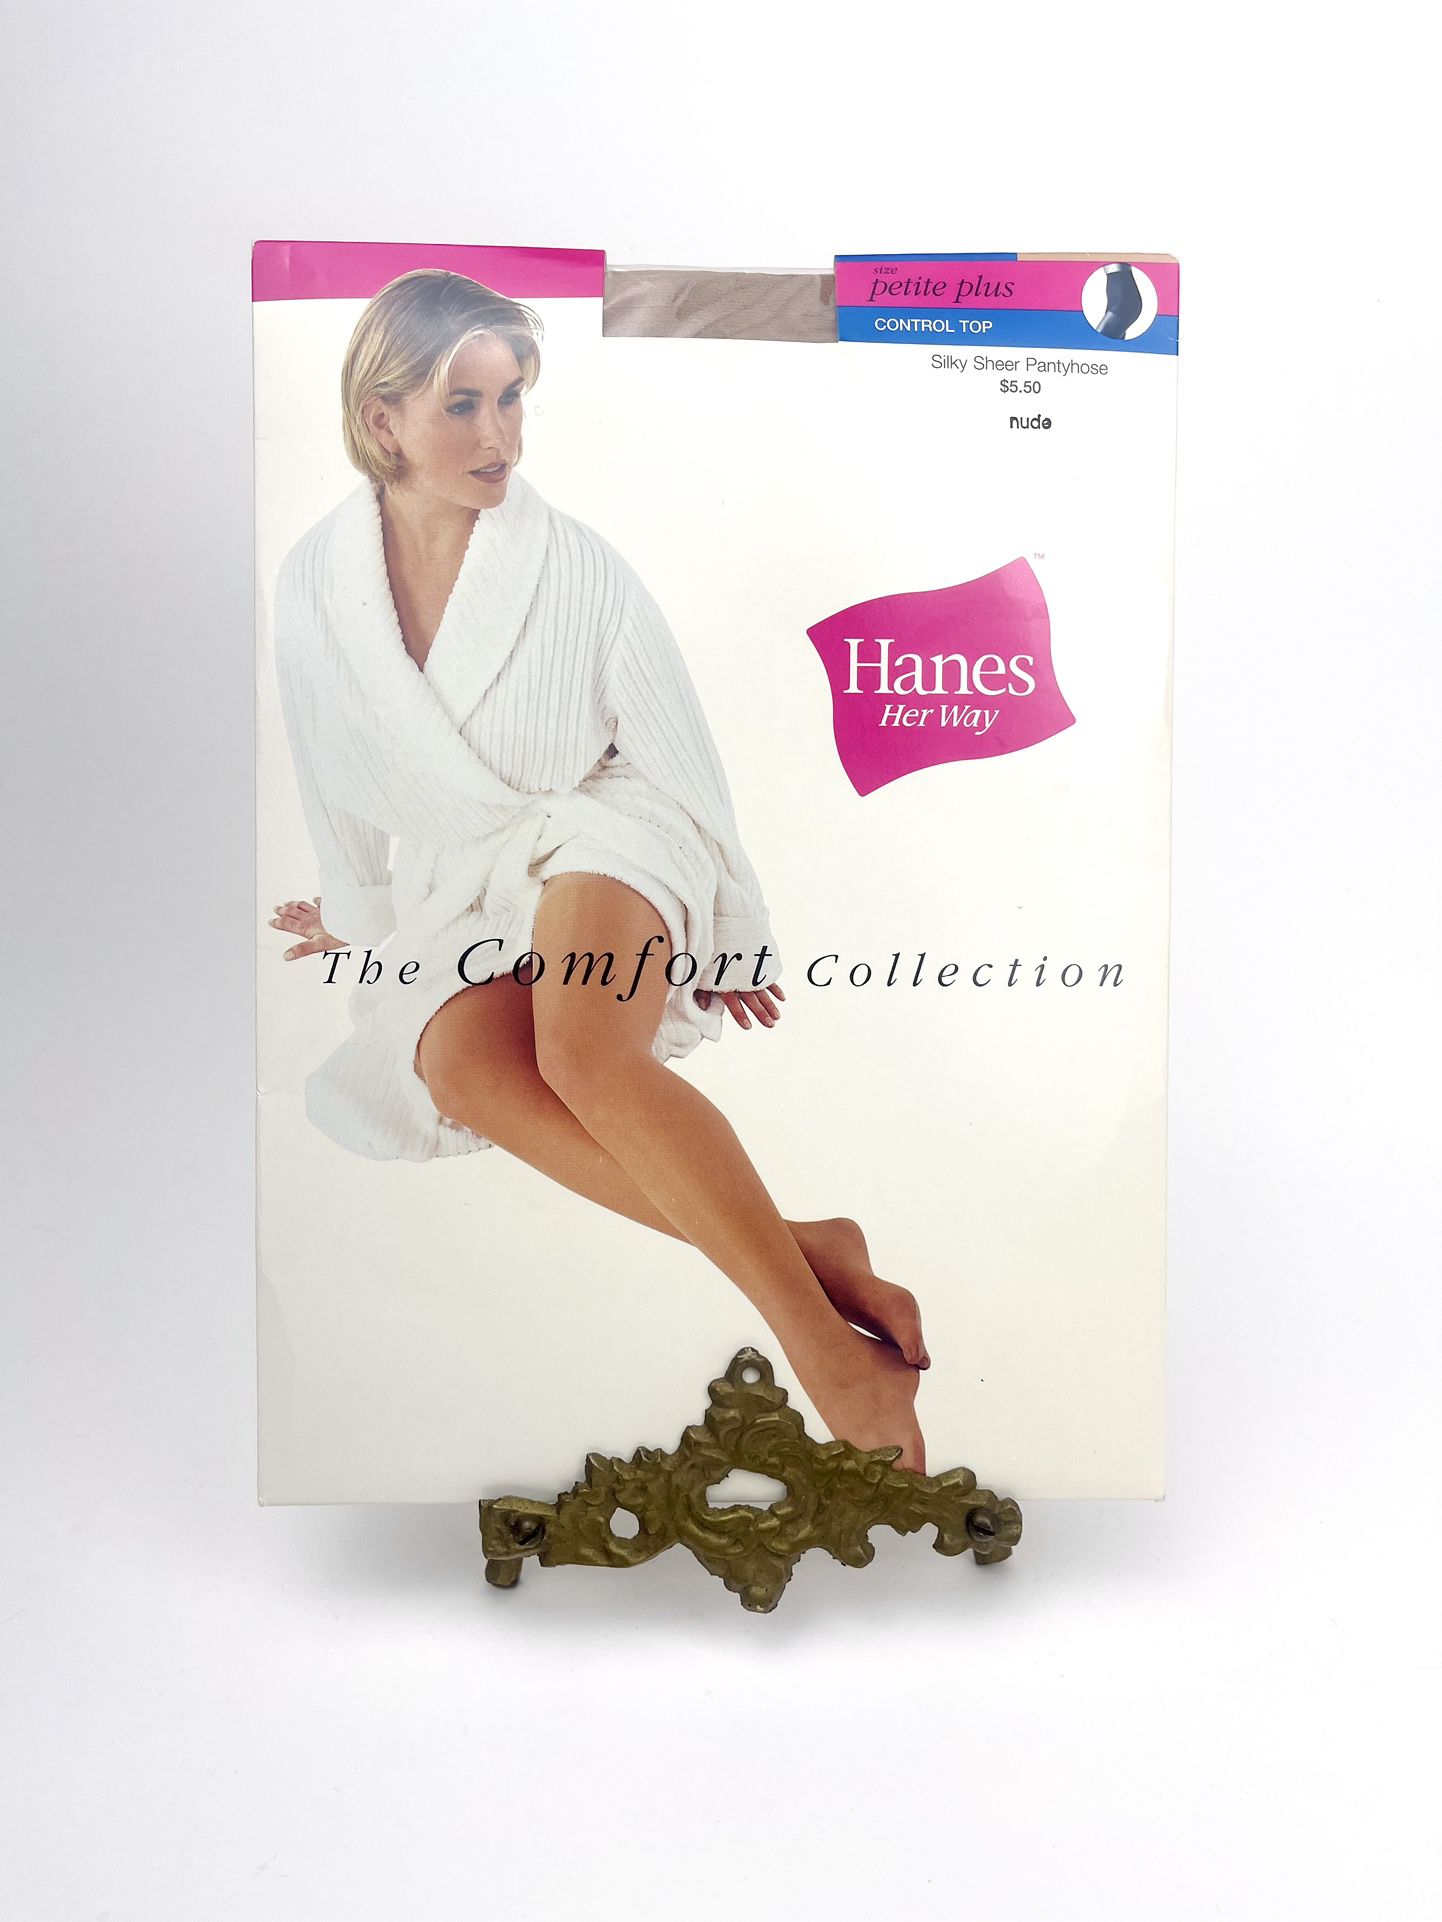 Hanes her Way Comfort Collection Pantyhose Control Top Petite Plus Nude NEW NOS